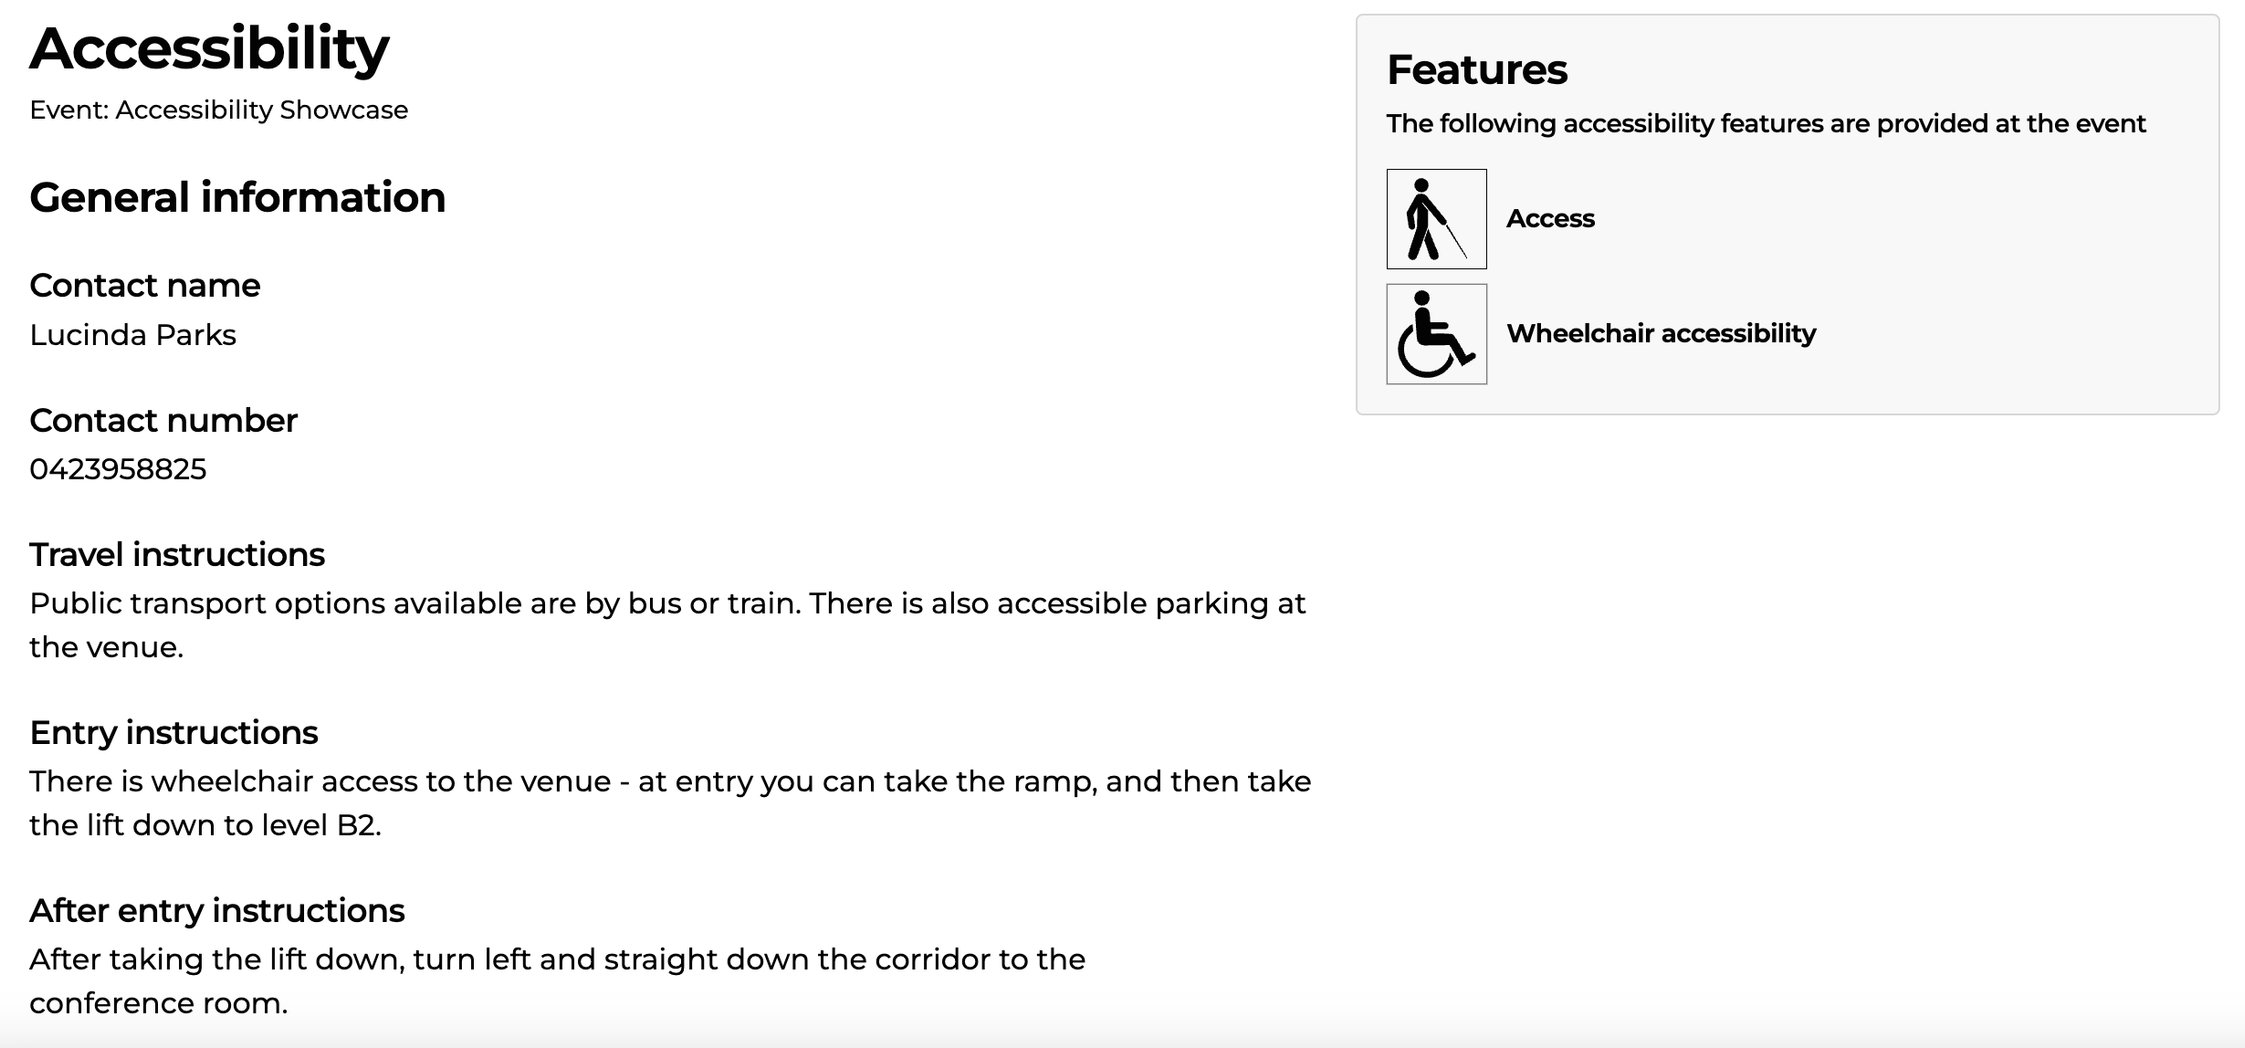 Screenshot of Accessibility landing page that details information and features